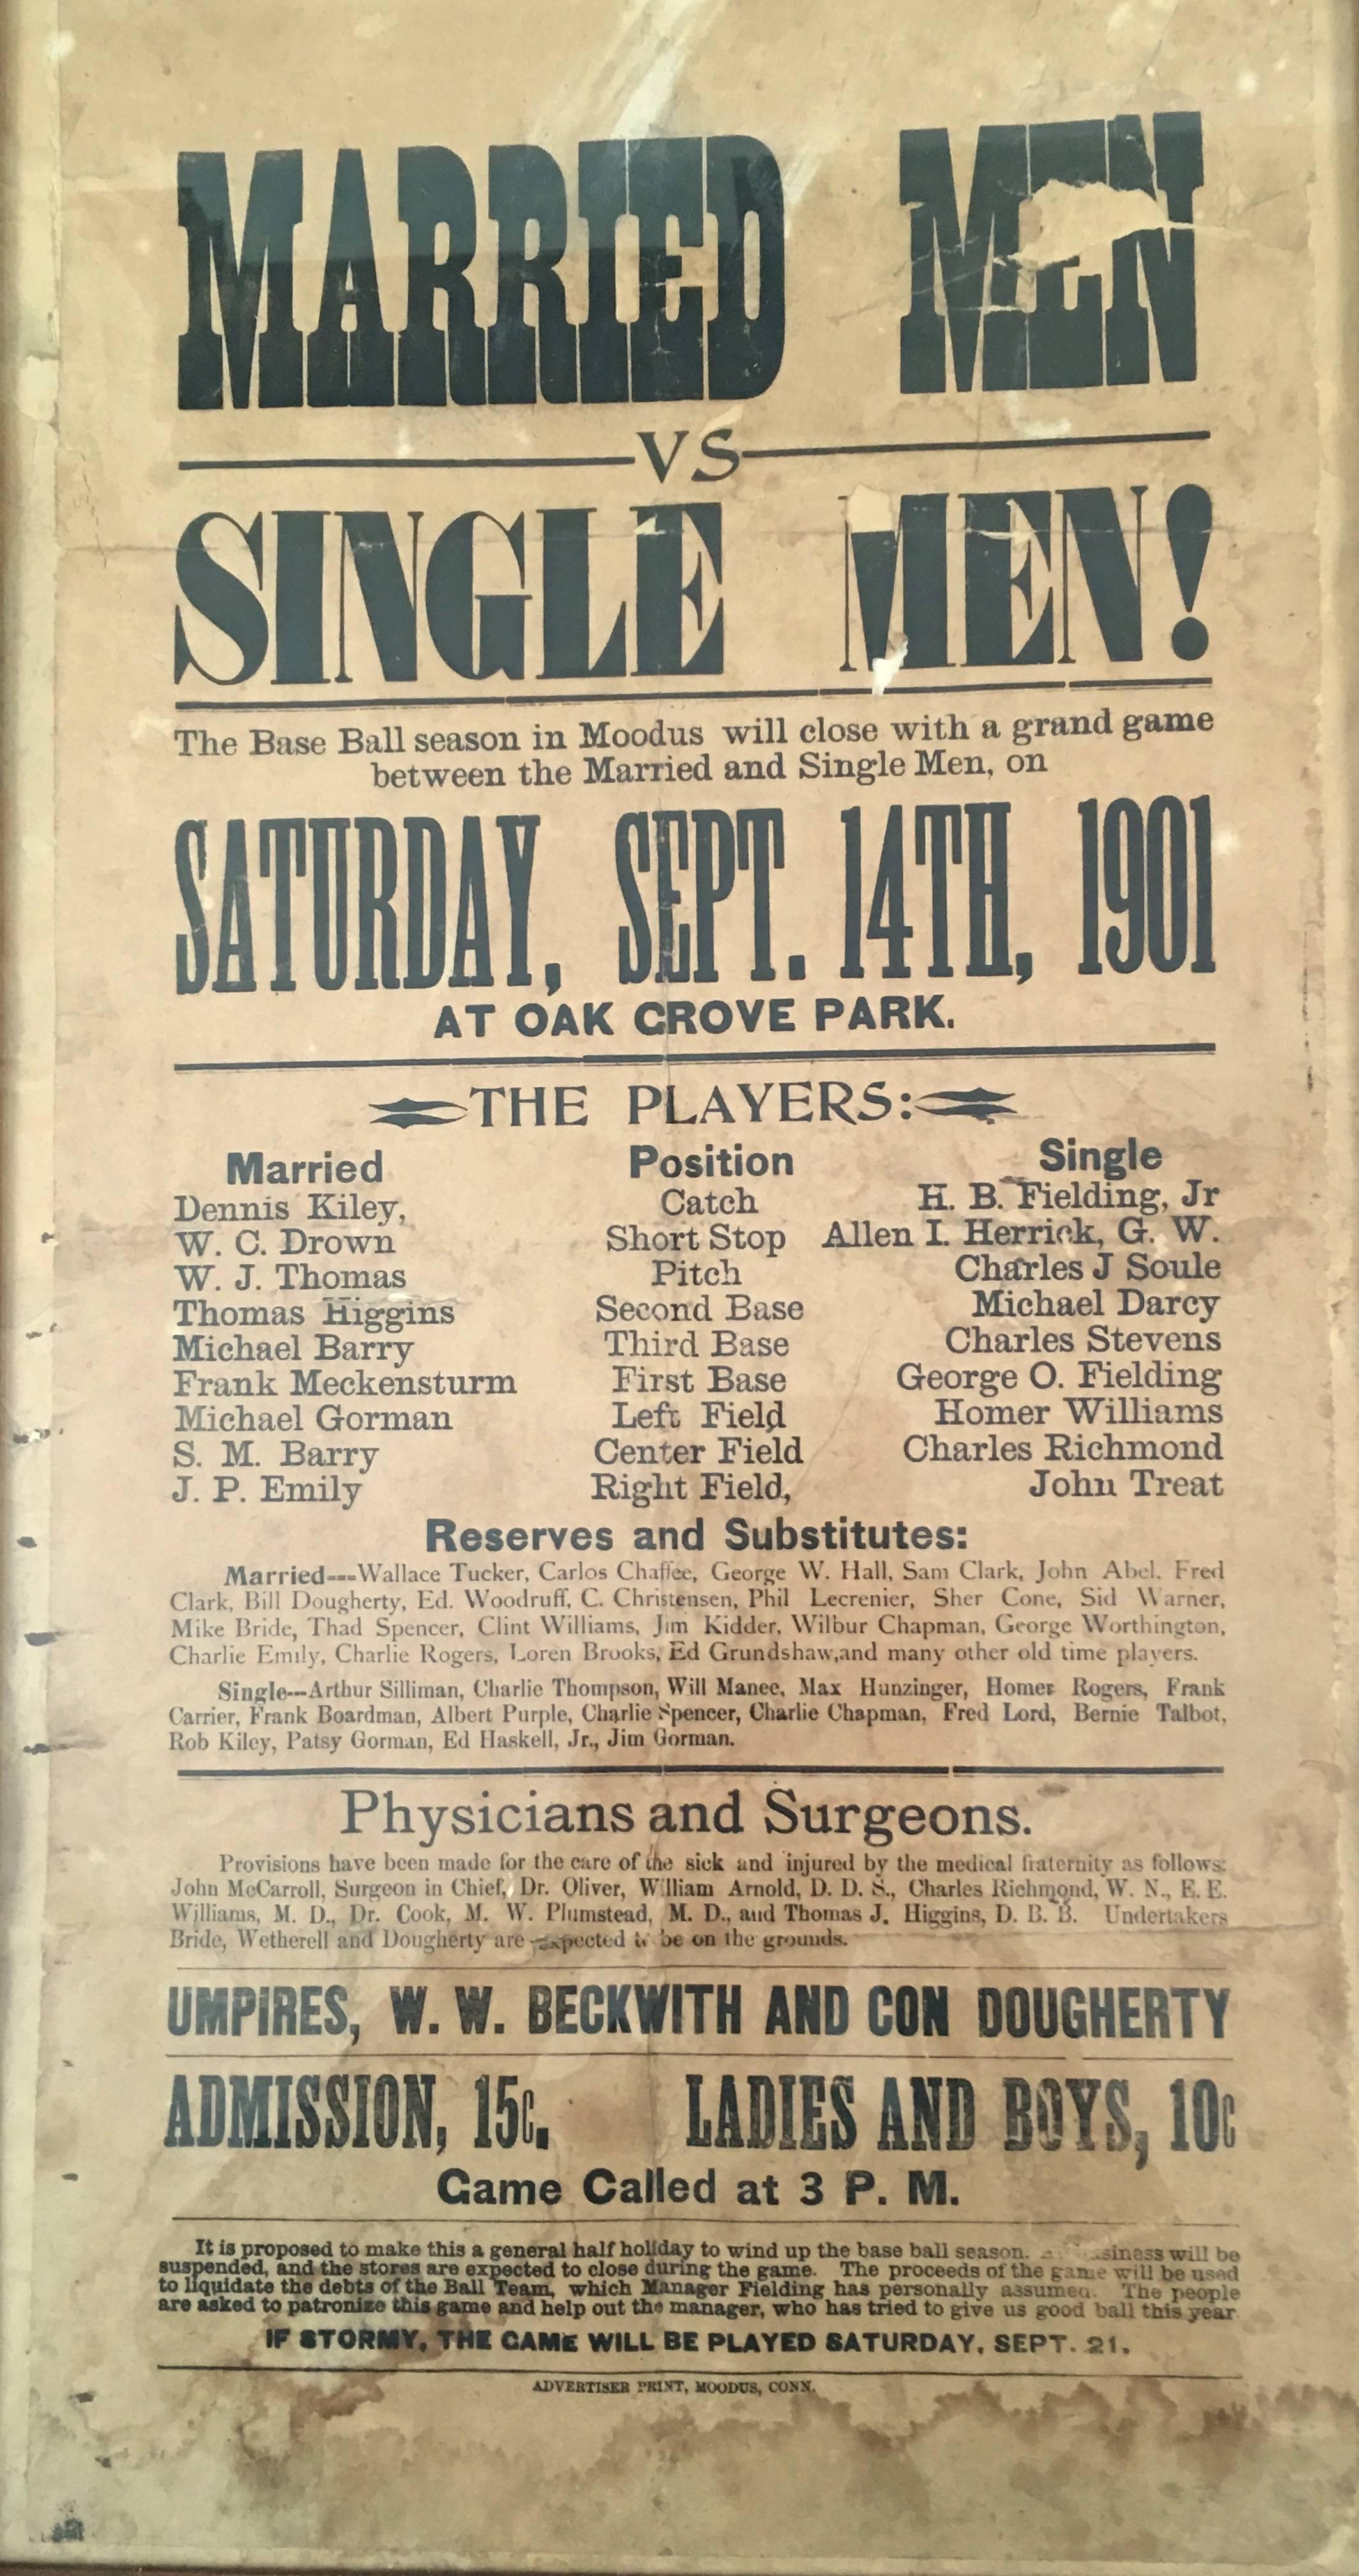 A rare printed baseball game broadside, advertising a game between two teams: Married men vs Single men, in Moodus, Connecticut (a village that is part of East Haddam) on September 14th, 1901, at Oak Grove Park, marking the end of the baseball